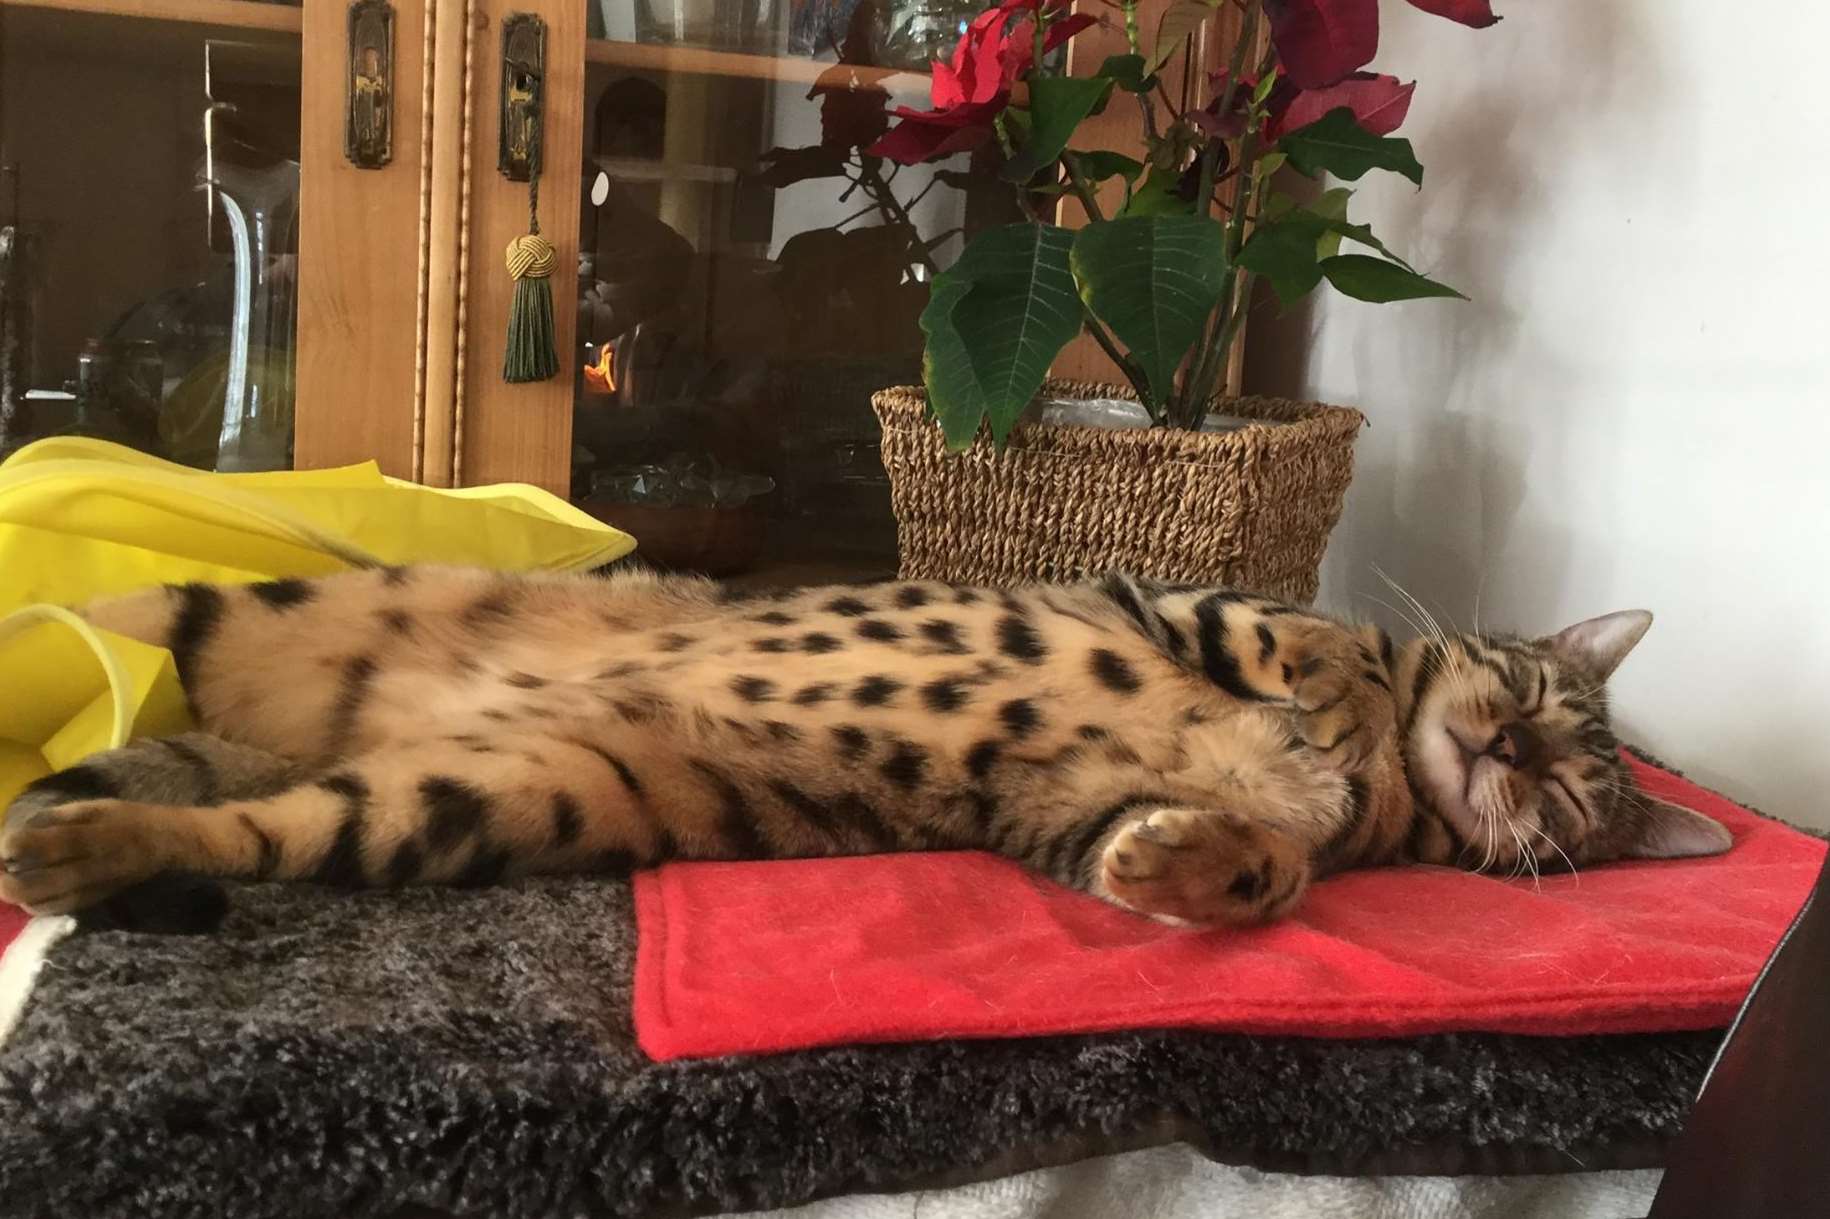 Bengal cat Rosie, who was found with her tail cut off in October 2016, could have been a victim of the notorious cat killer